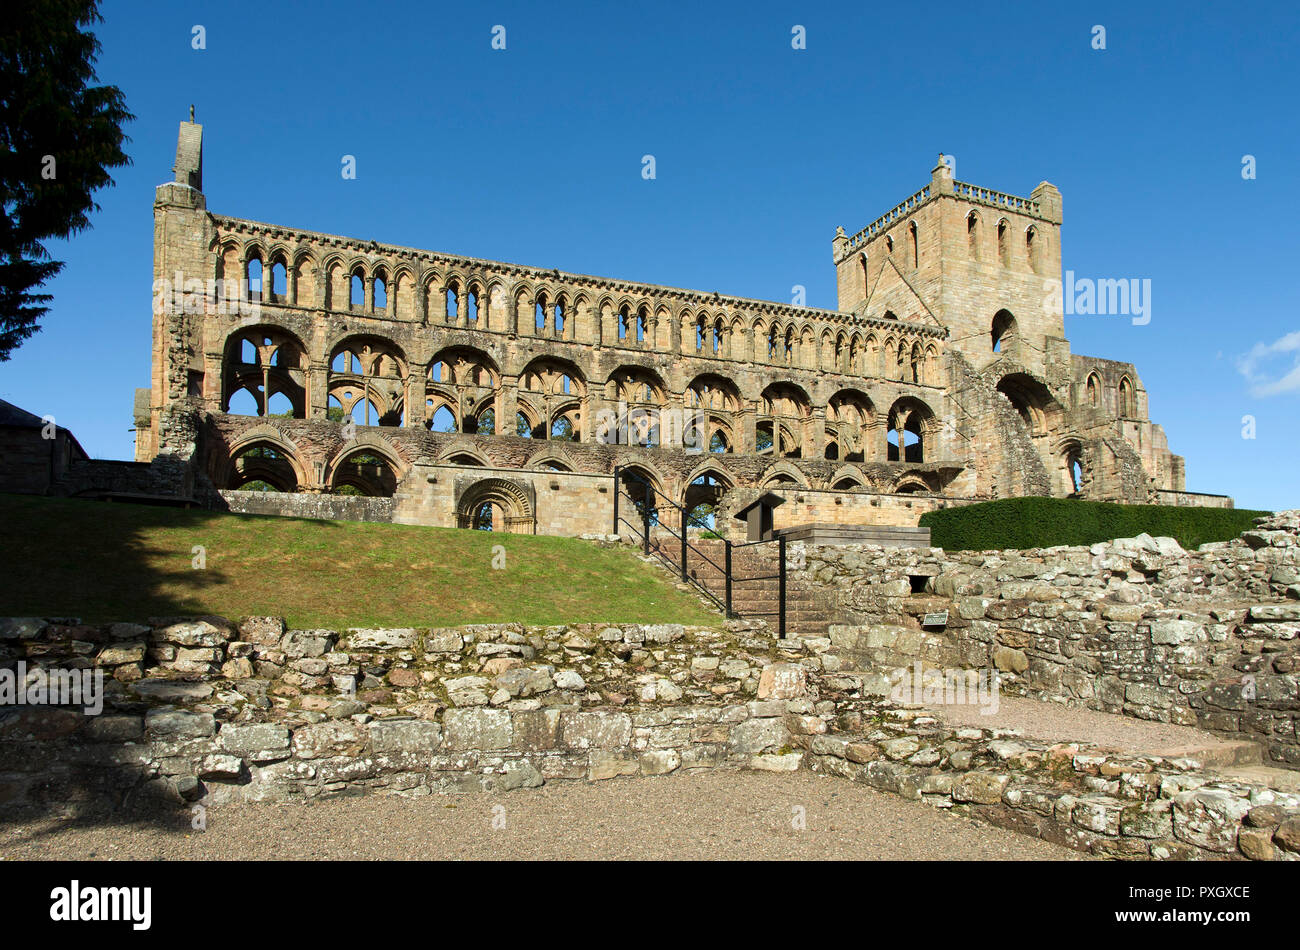 Ruins of Jedburgh Abbey 12th century Augustinian Abbey and monastry. Mix of Romanesque and Gothic architecture Stock Photo